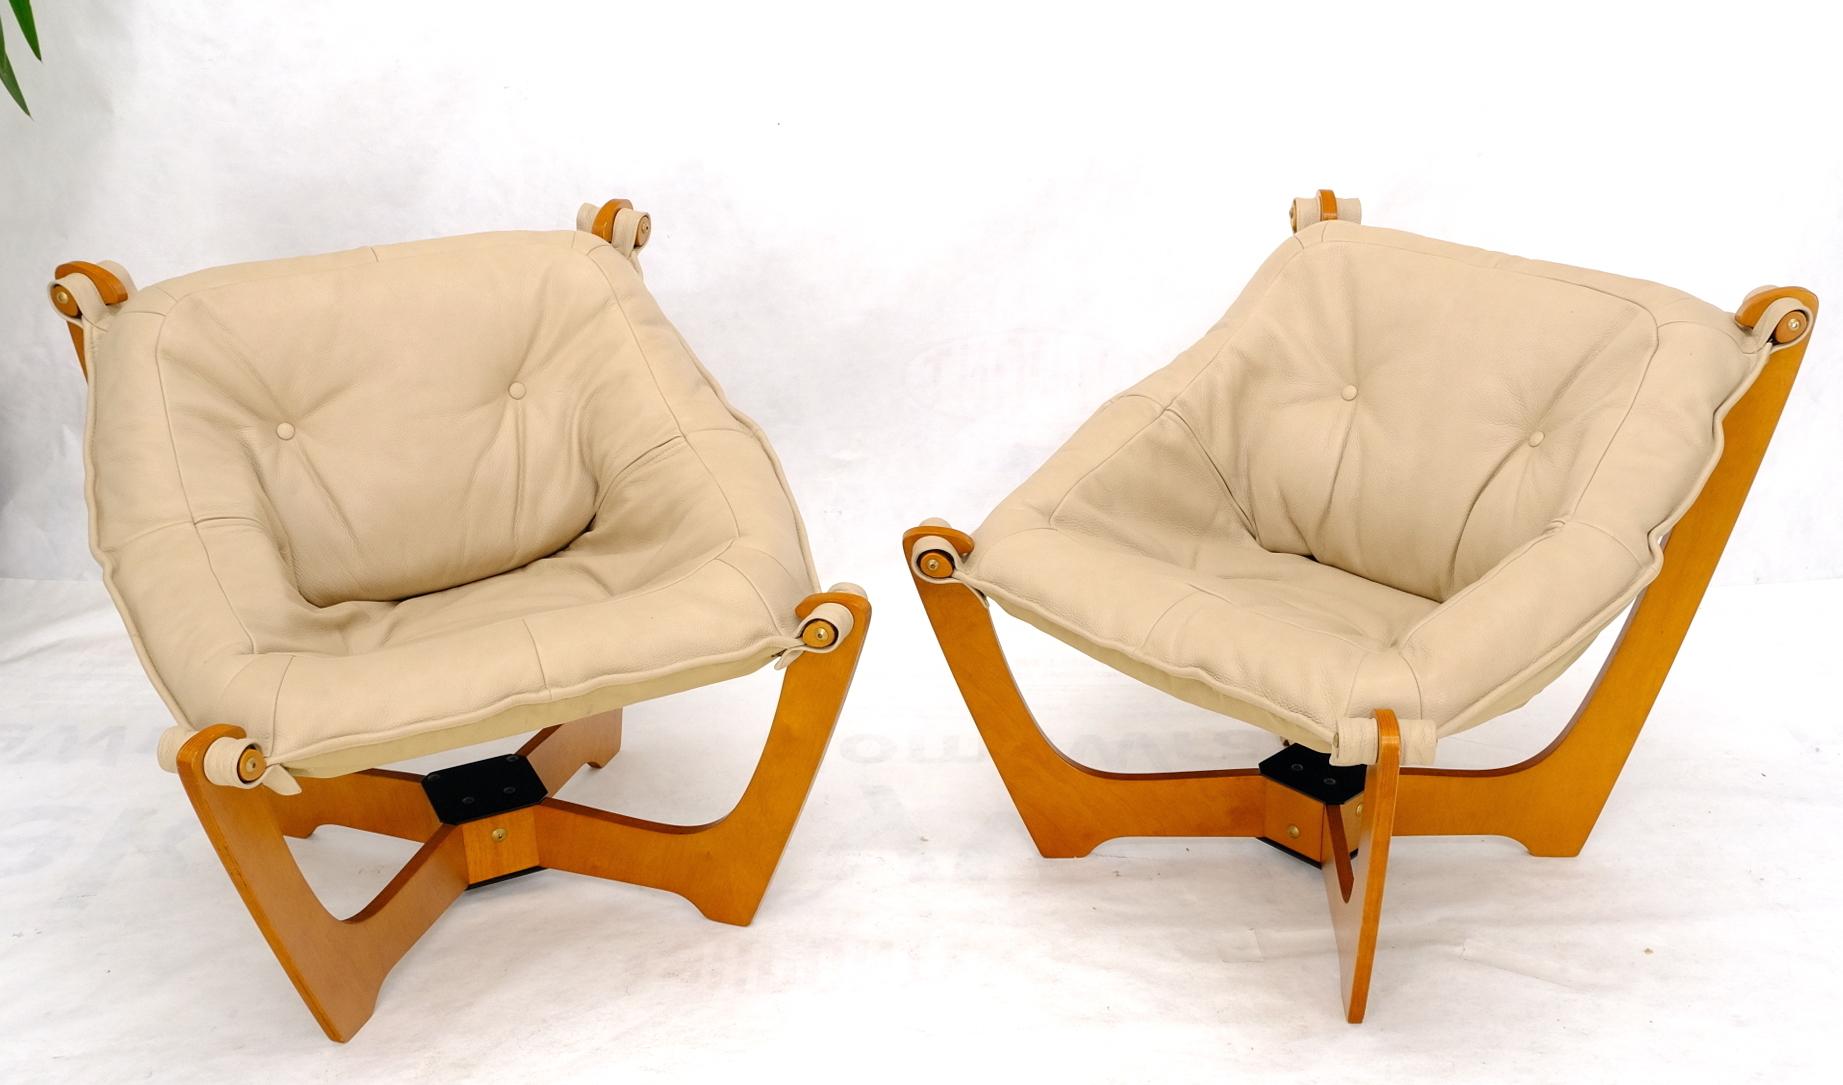 Pair of Danish modern beige sling upholstery lounge chairs. Very comfortable sling seats.